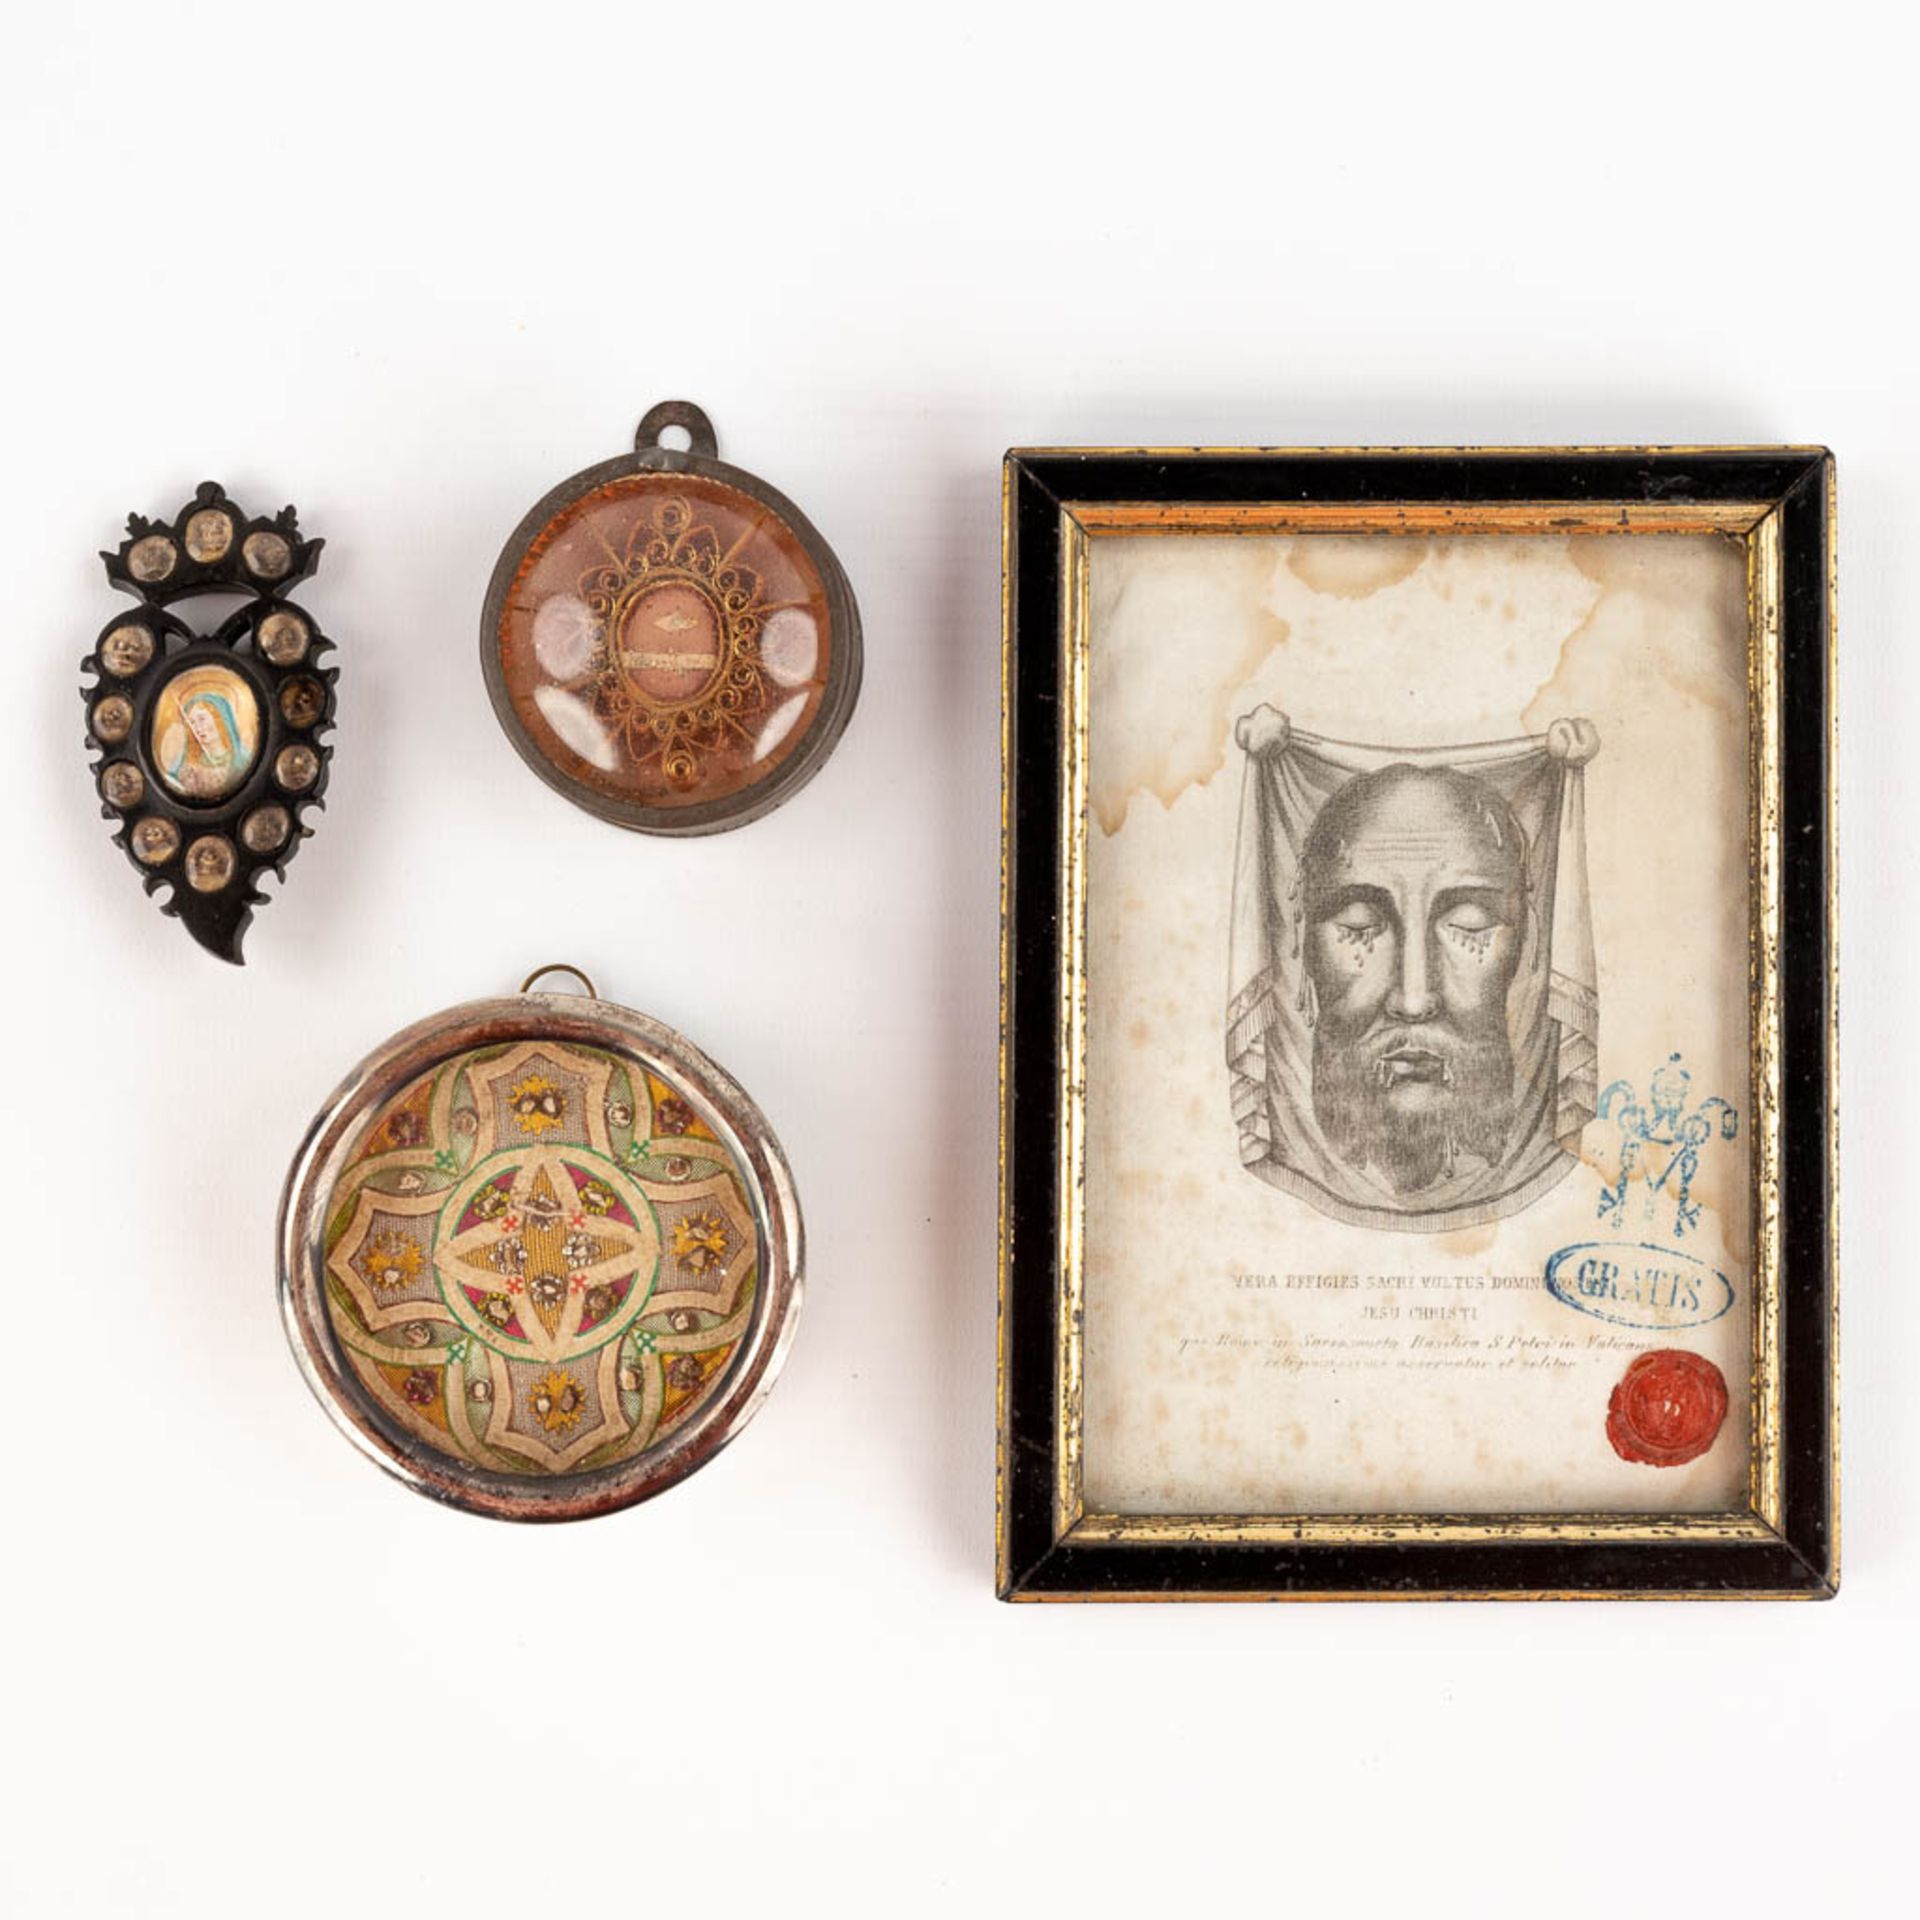 A small collection of relics and reliquary items, The Veil of Veronica, a relic in the shape of a sa